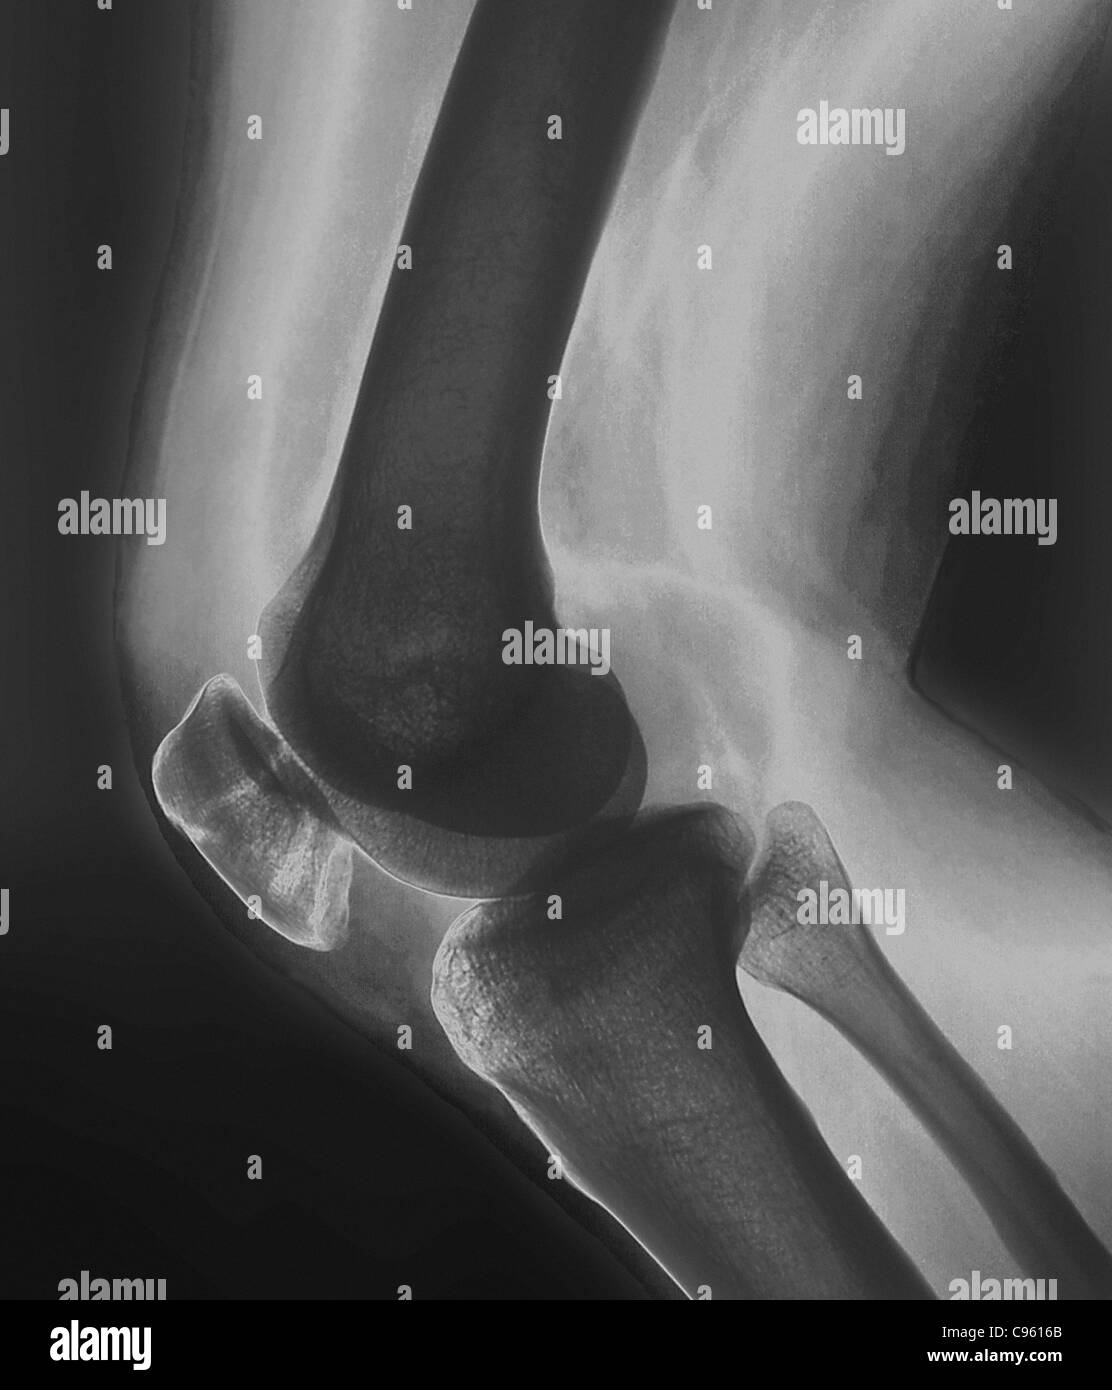 Broken knee. X-ray of the knee of a 38 year old patient with a fractured patella (kneecap). Stock Photo